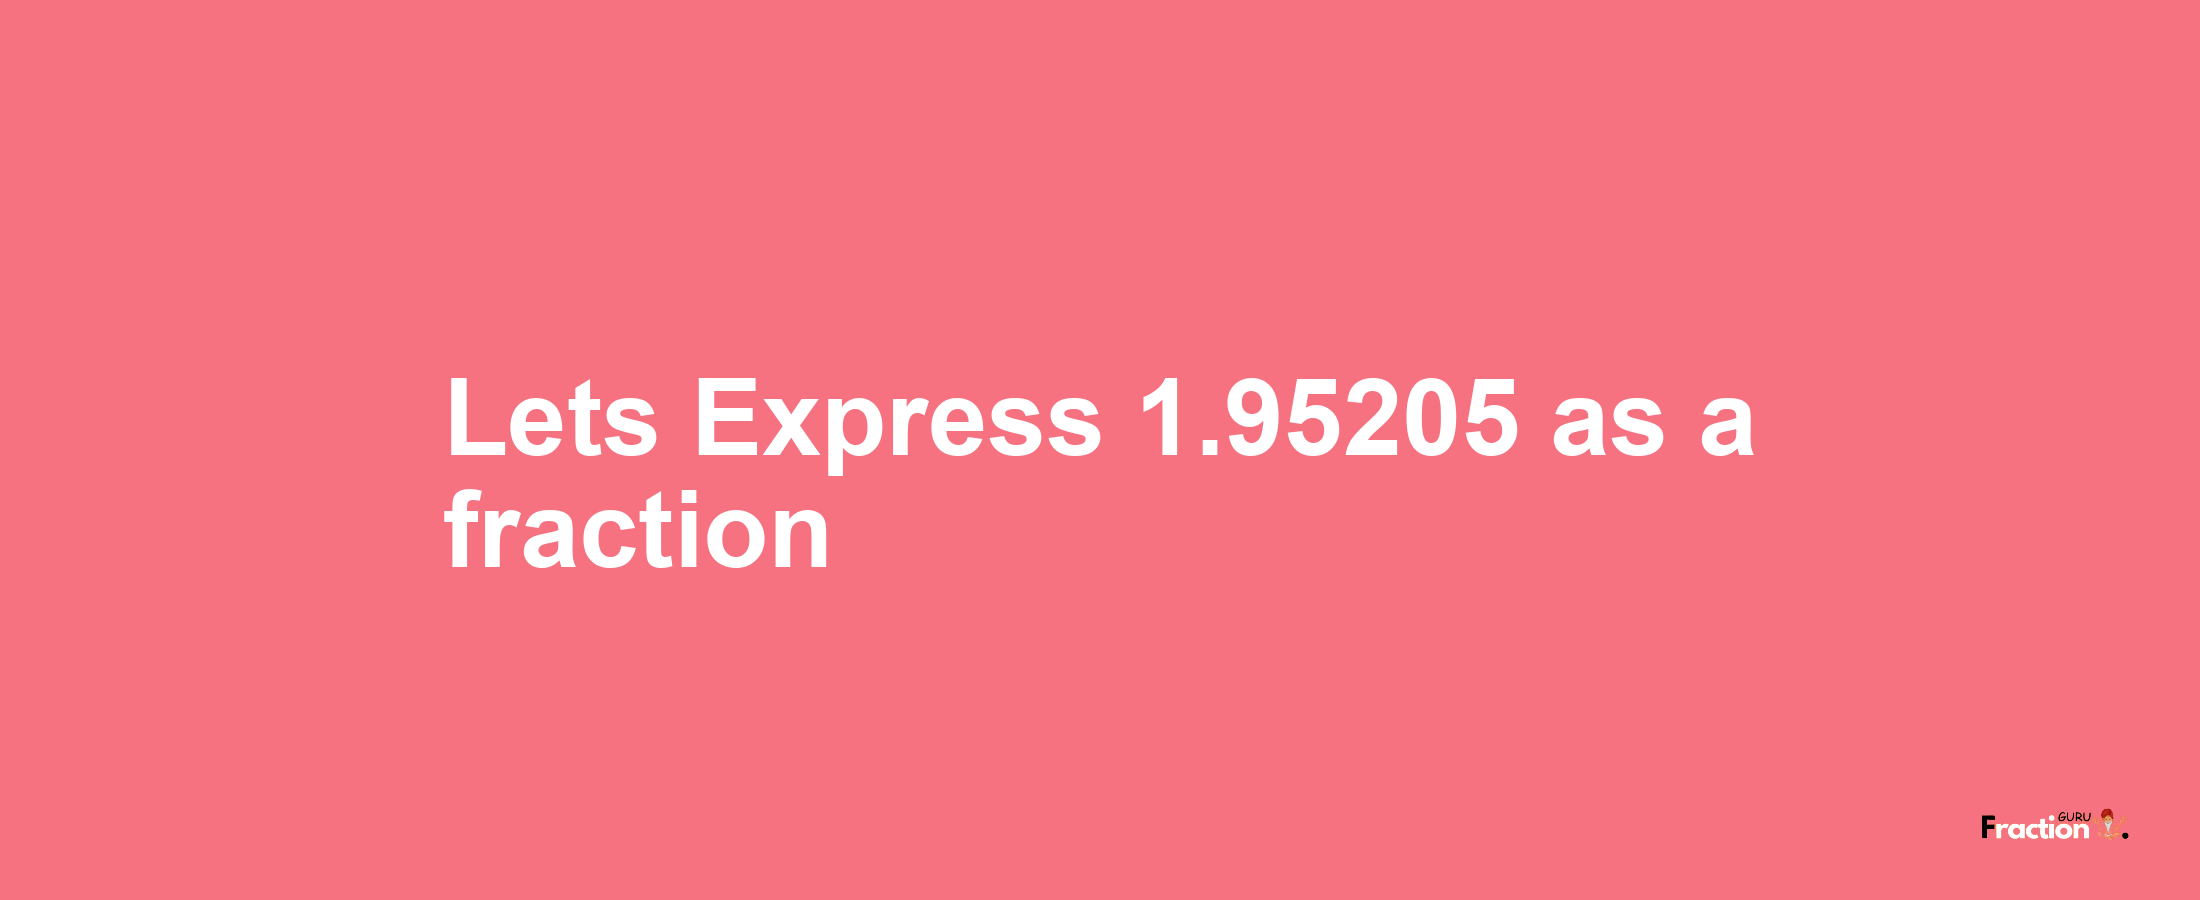 Lets Express 1.95205 as afraction